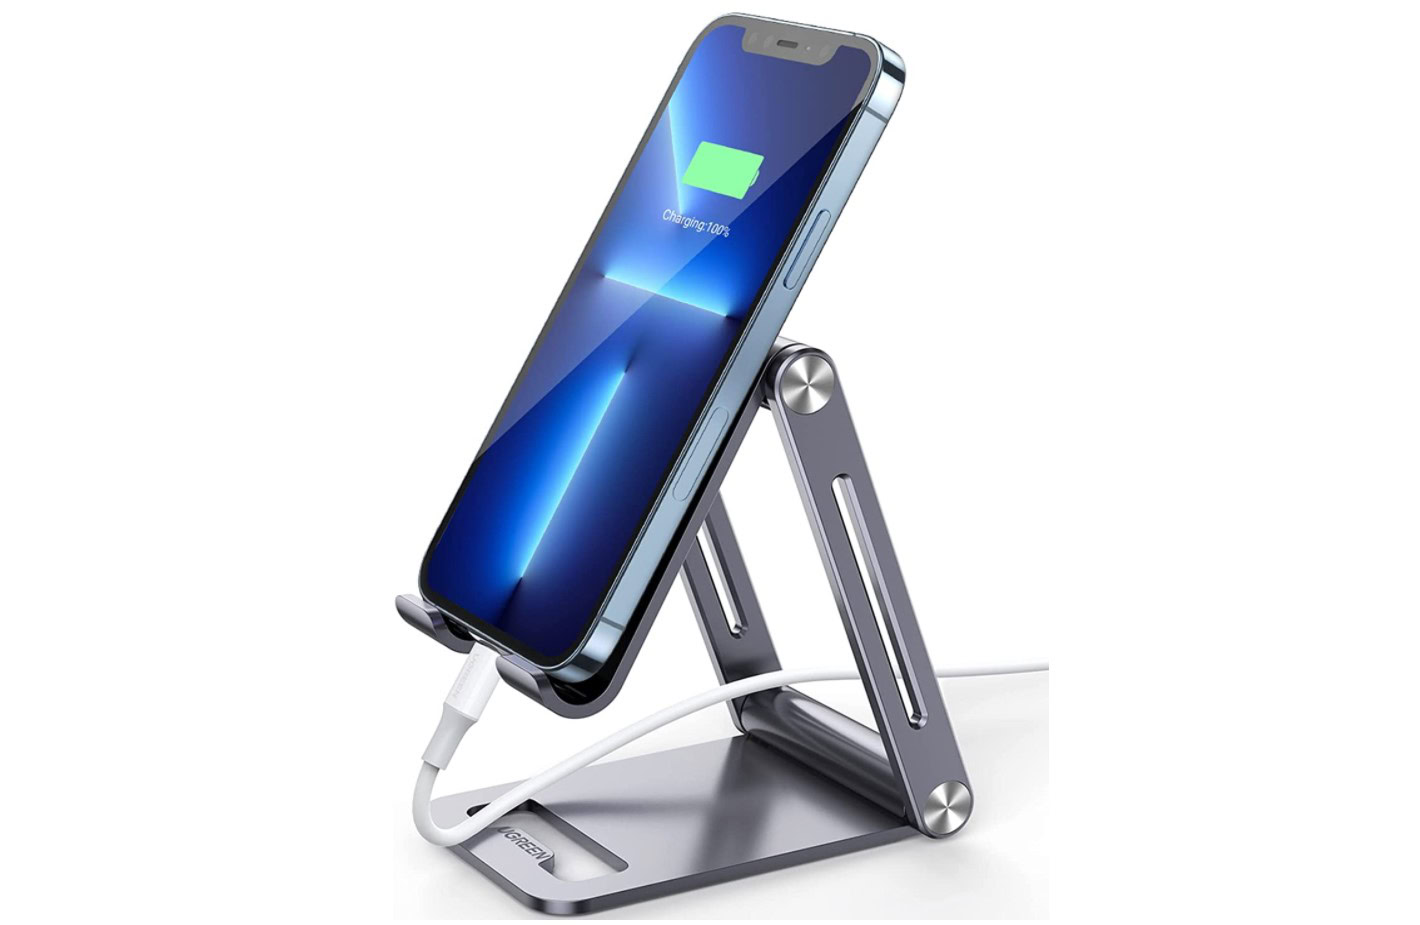  Lamicall Cell Phone Stand, Phone Holder - [Height